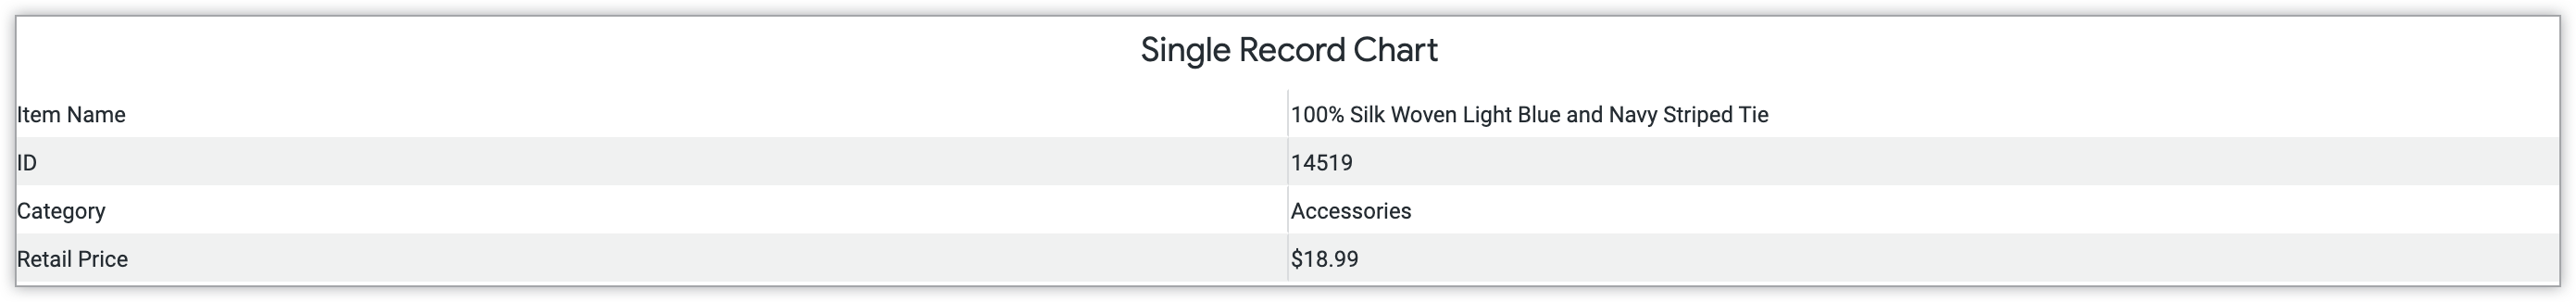 Single record chart showing the Product ID, Category, and Retail Price of the item.